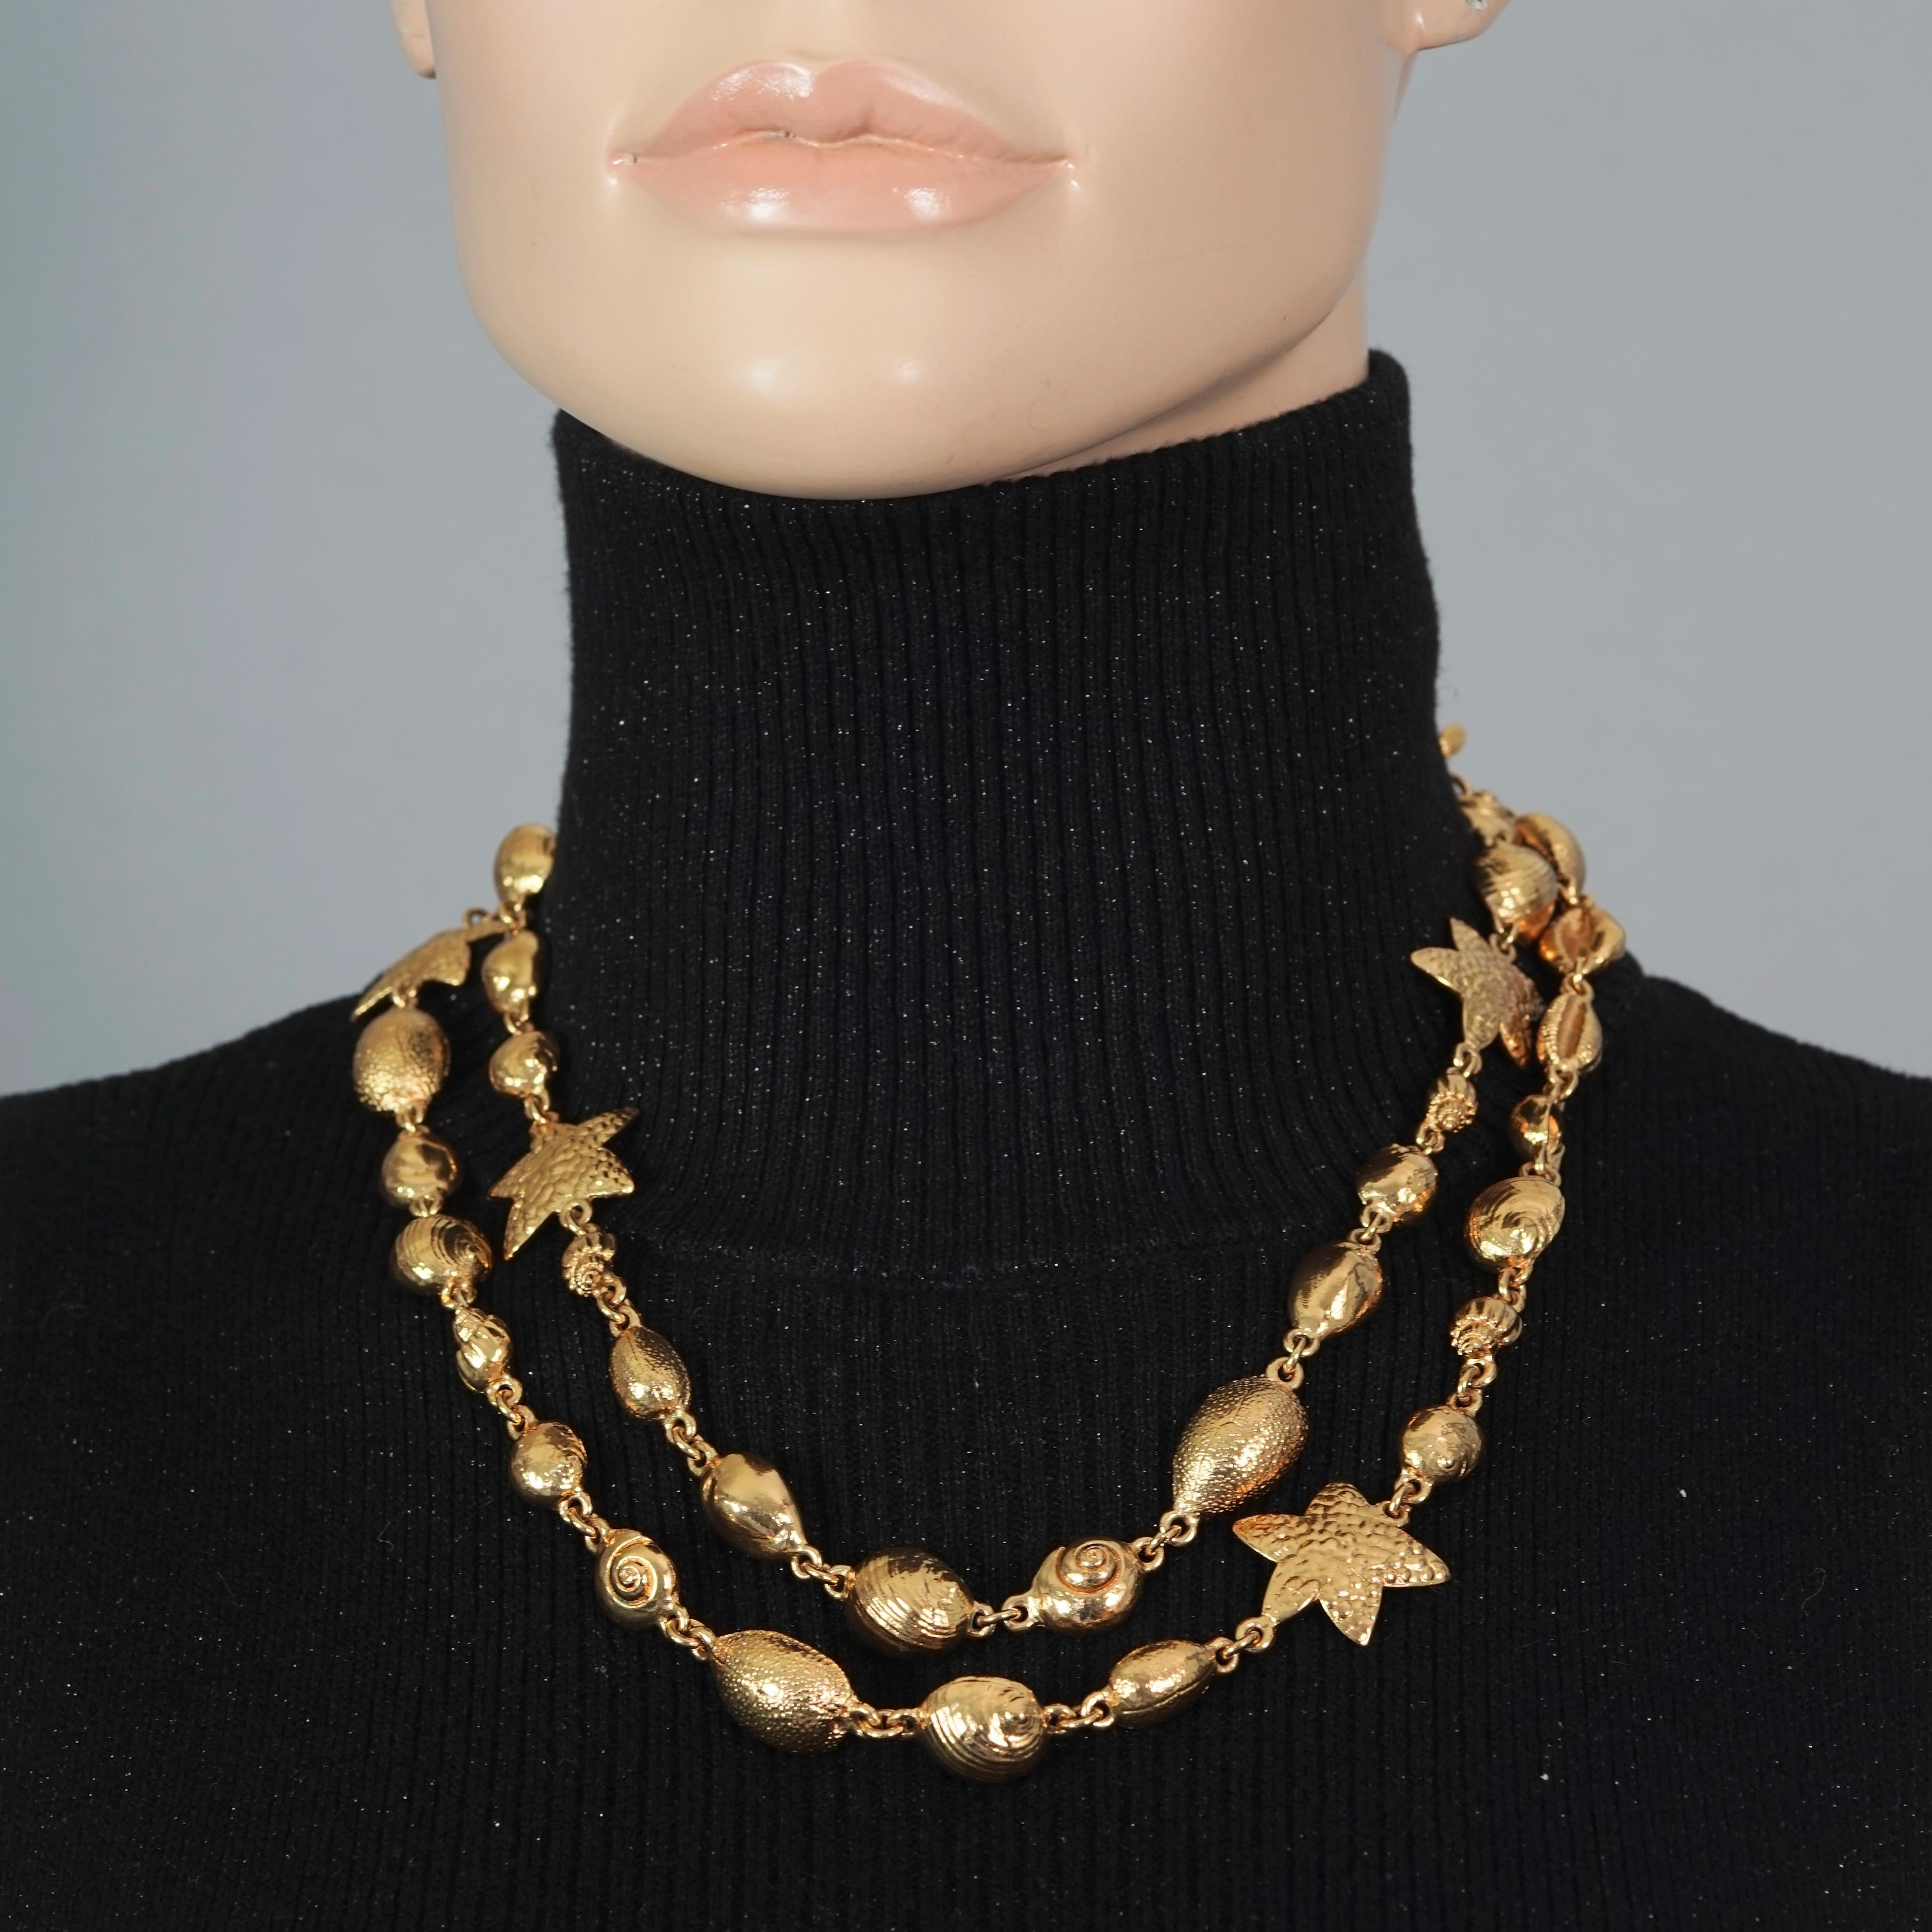 Vintage YSL Yves Saint Laurent by Robert Goossens Sea Shells Textured Necklace

Measurements:
Height: 1 inch (2.54 cm)
Total Length: 43 6/8inches (111.12 cm)

Features:
- 100% Authentic YVES SAINT LAURENT by Robert Goossens.
- Articulated links of